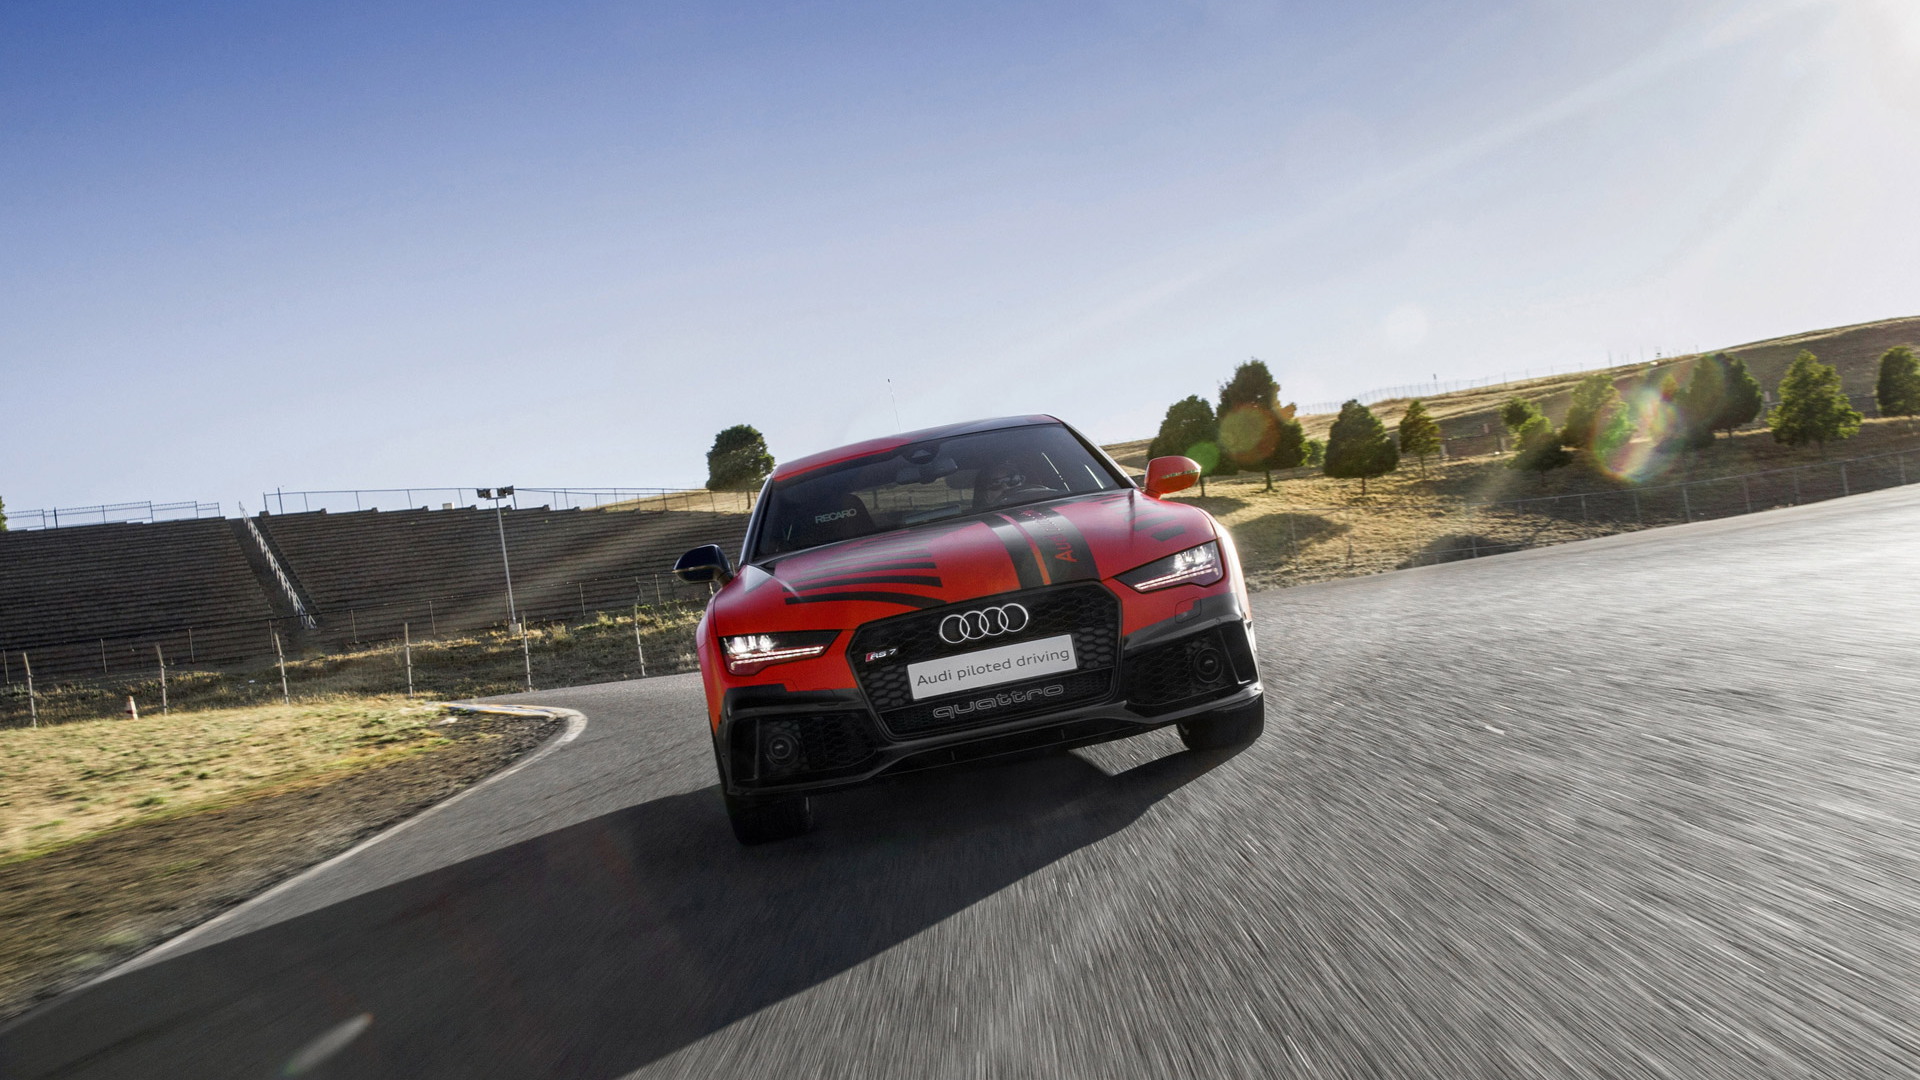 Audi RS 7 Piloted Driving concept at Sonoma Raceway, July 2015